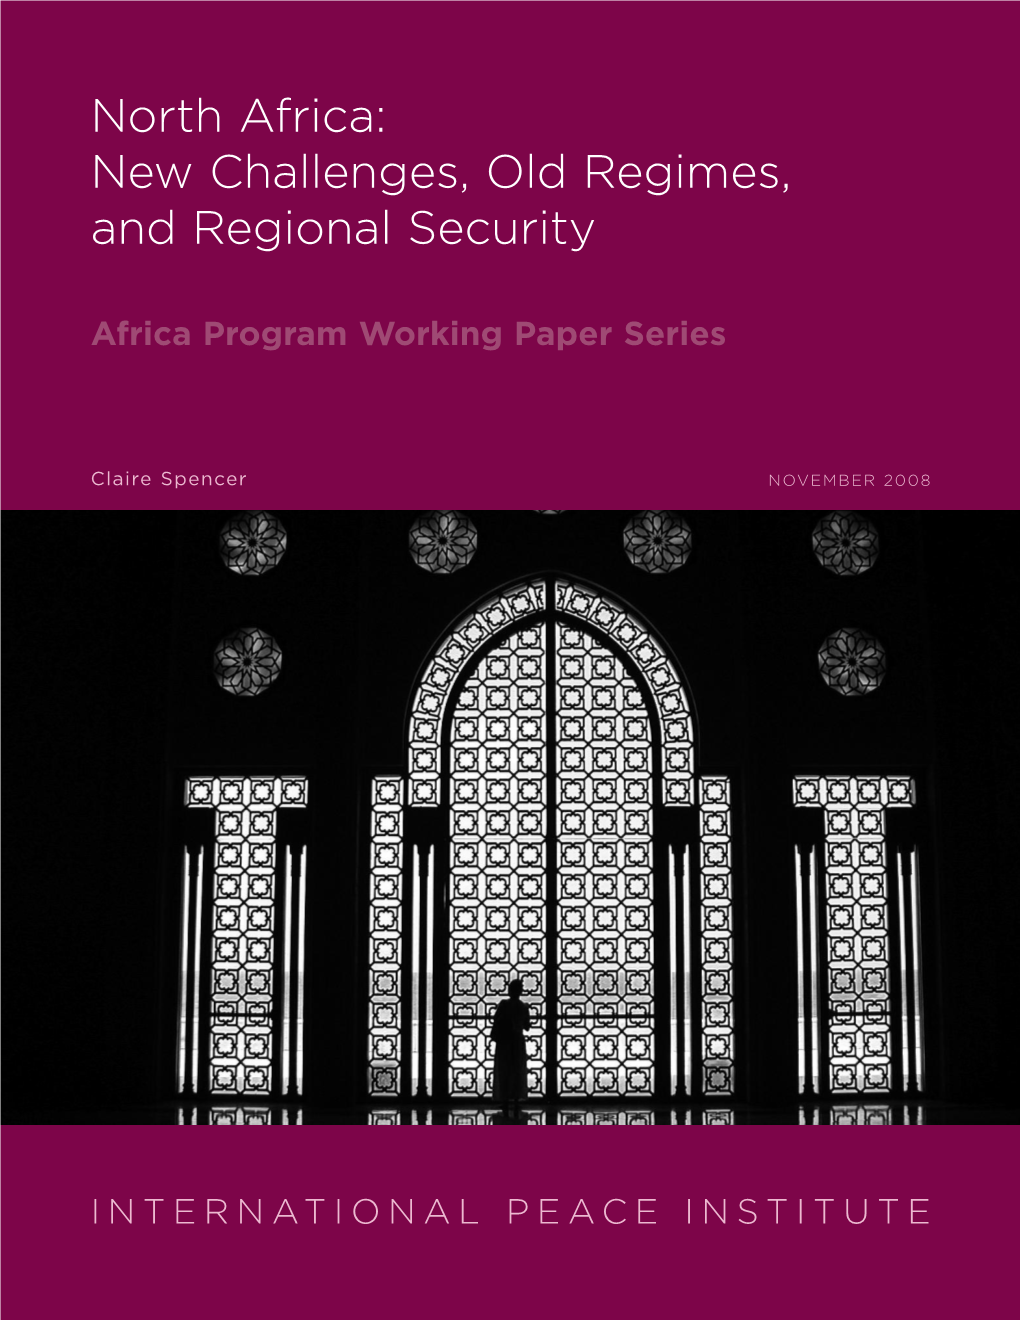 North Africa: New Challenges, Old Regimes, and Regional Security